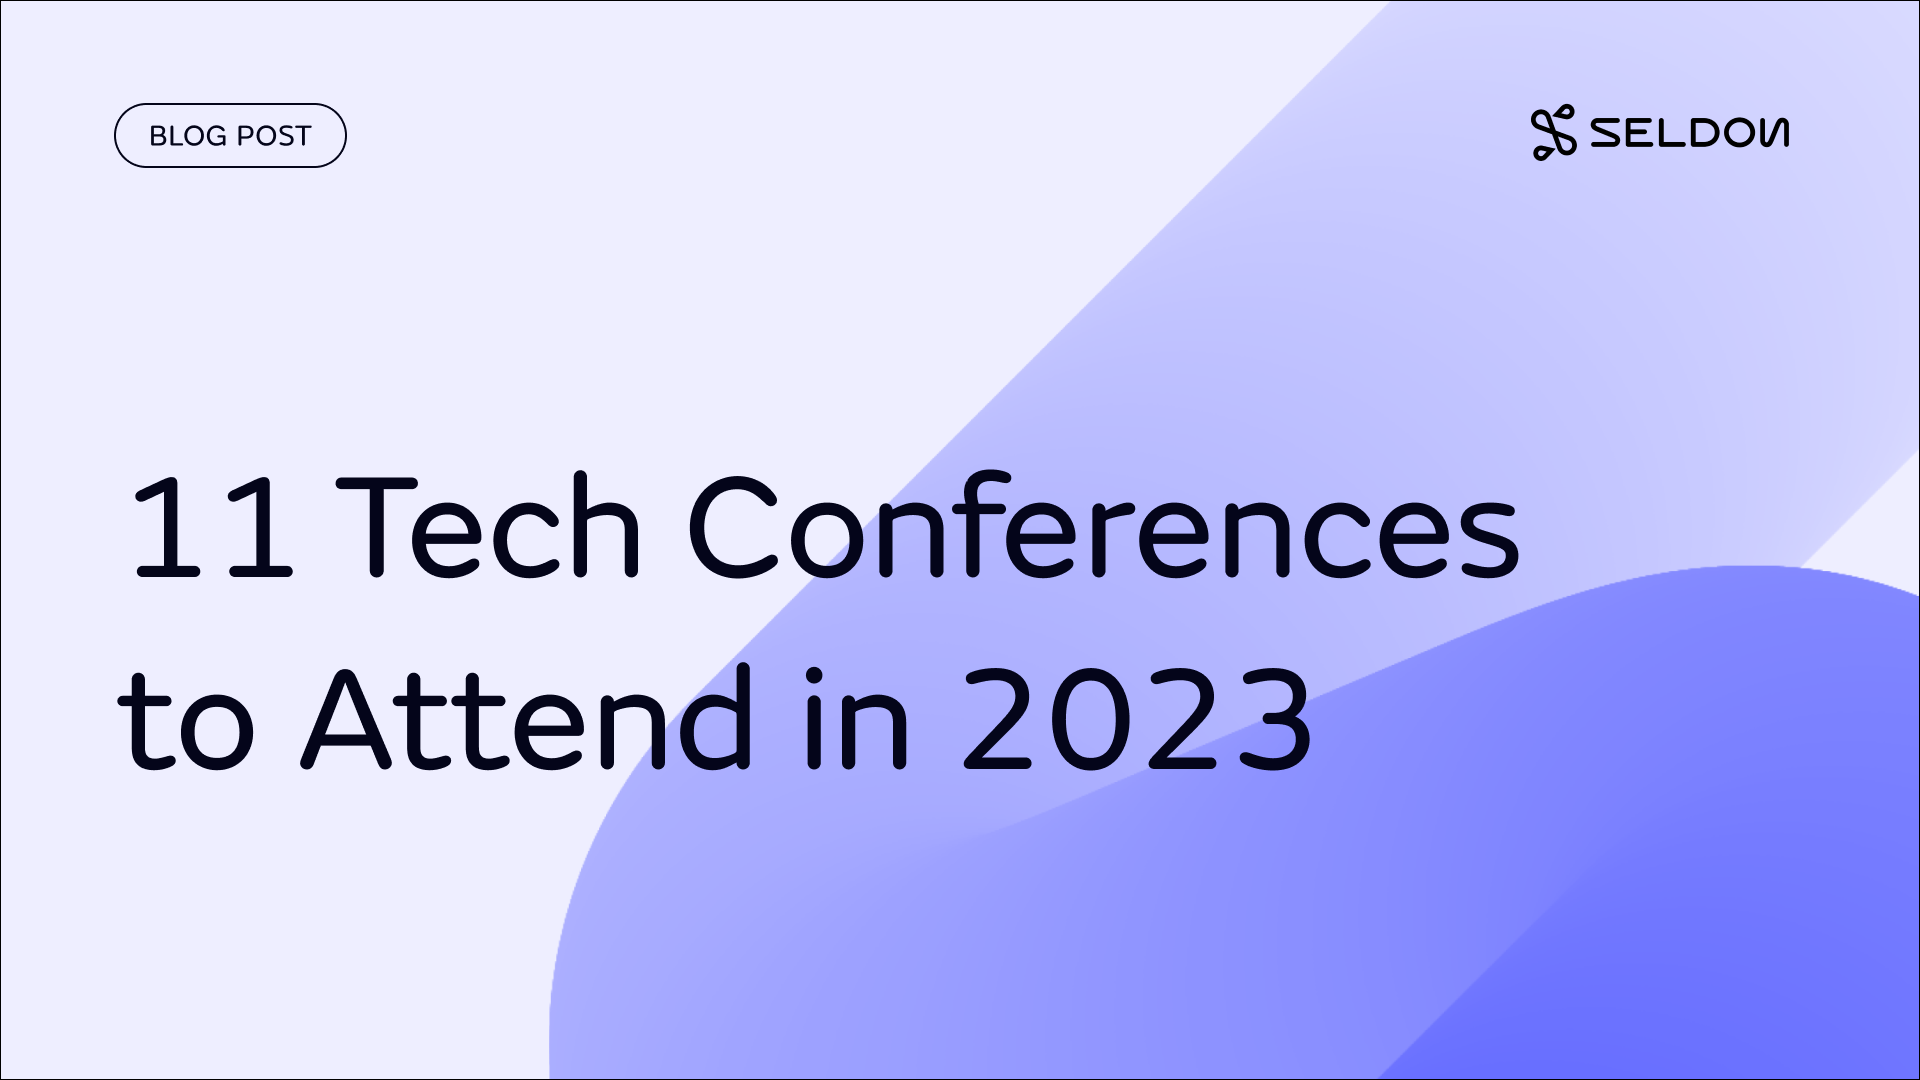 11 Tech Conferences to Attend in 2023